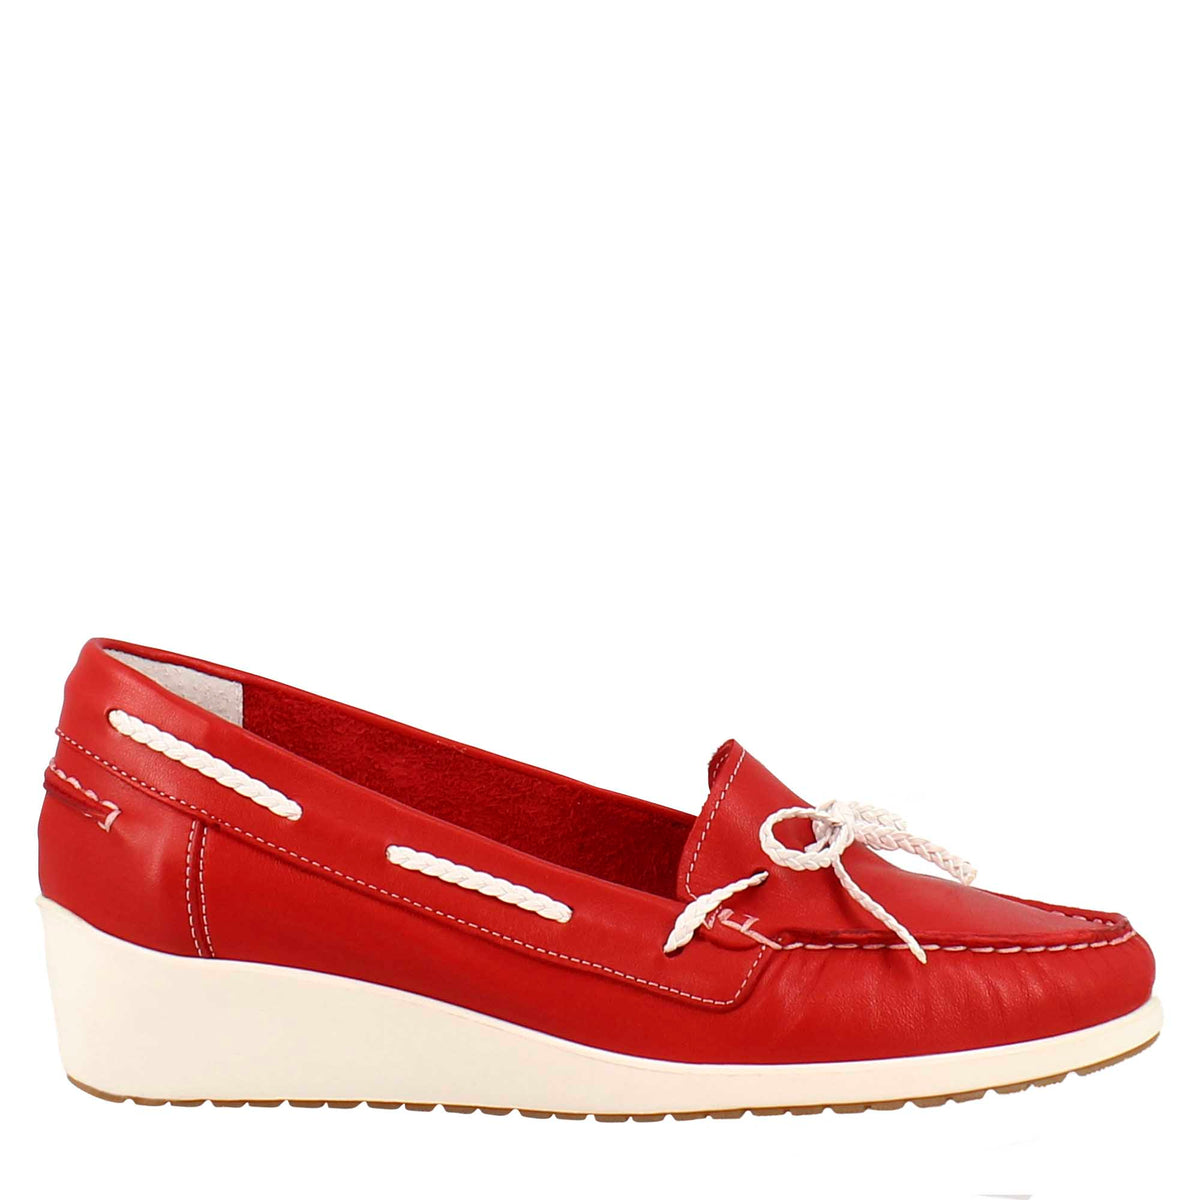 Women's handmade wedges loafers in red leather